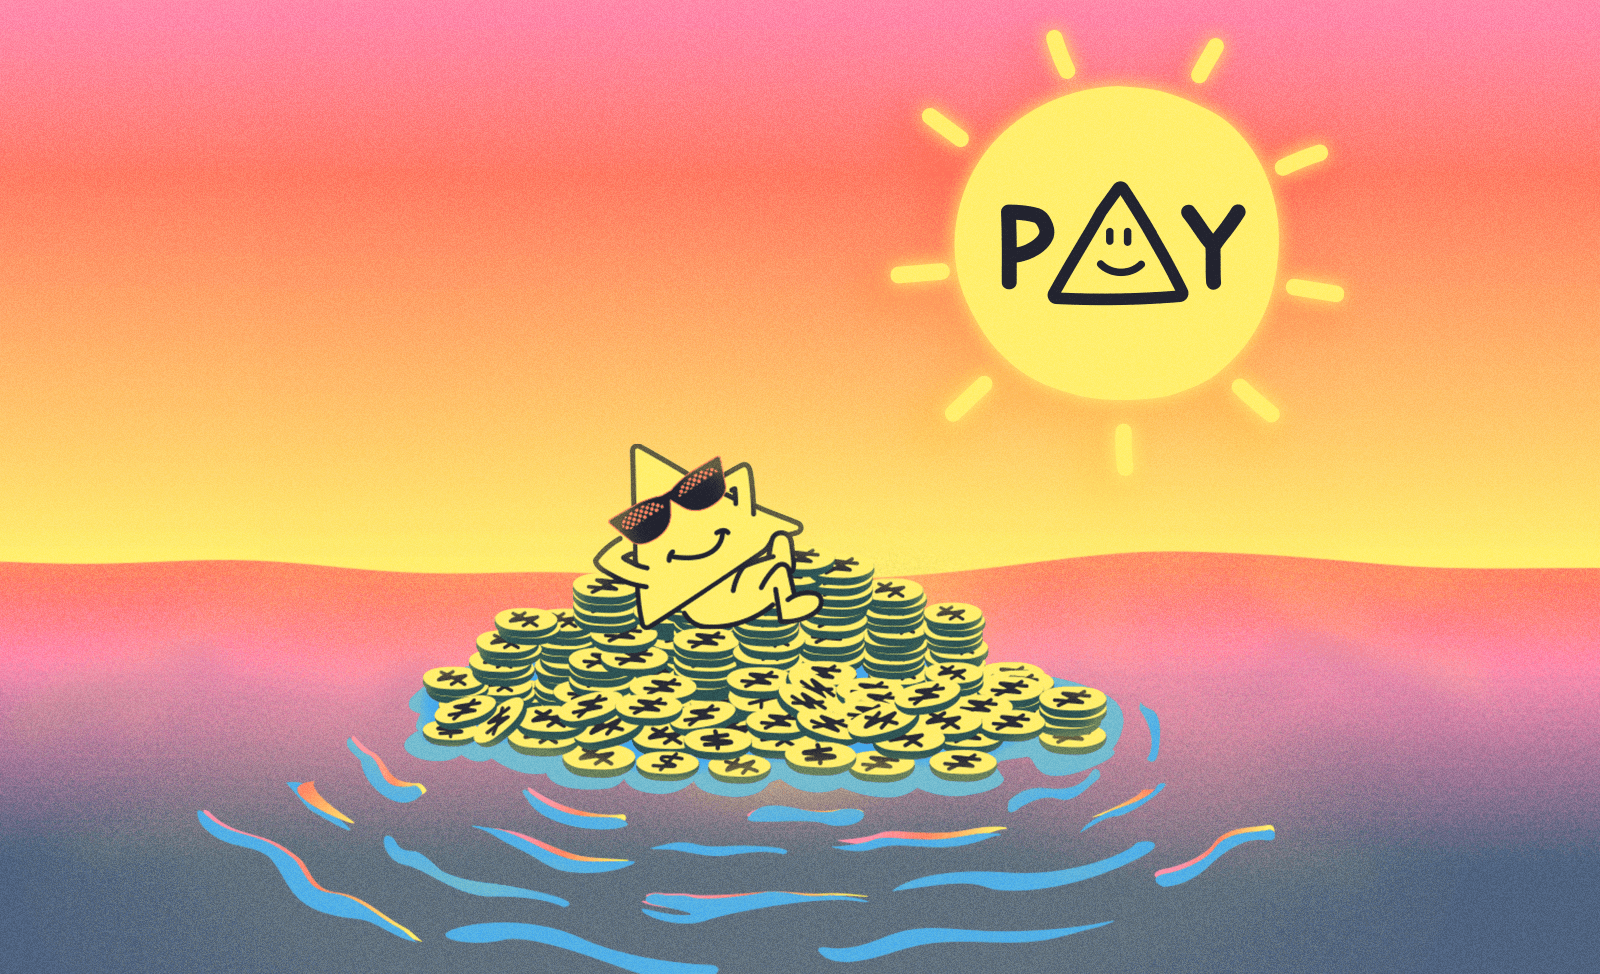 Pay Day Image